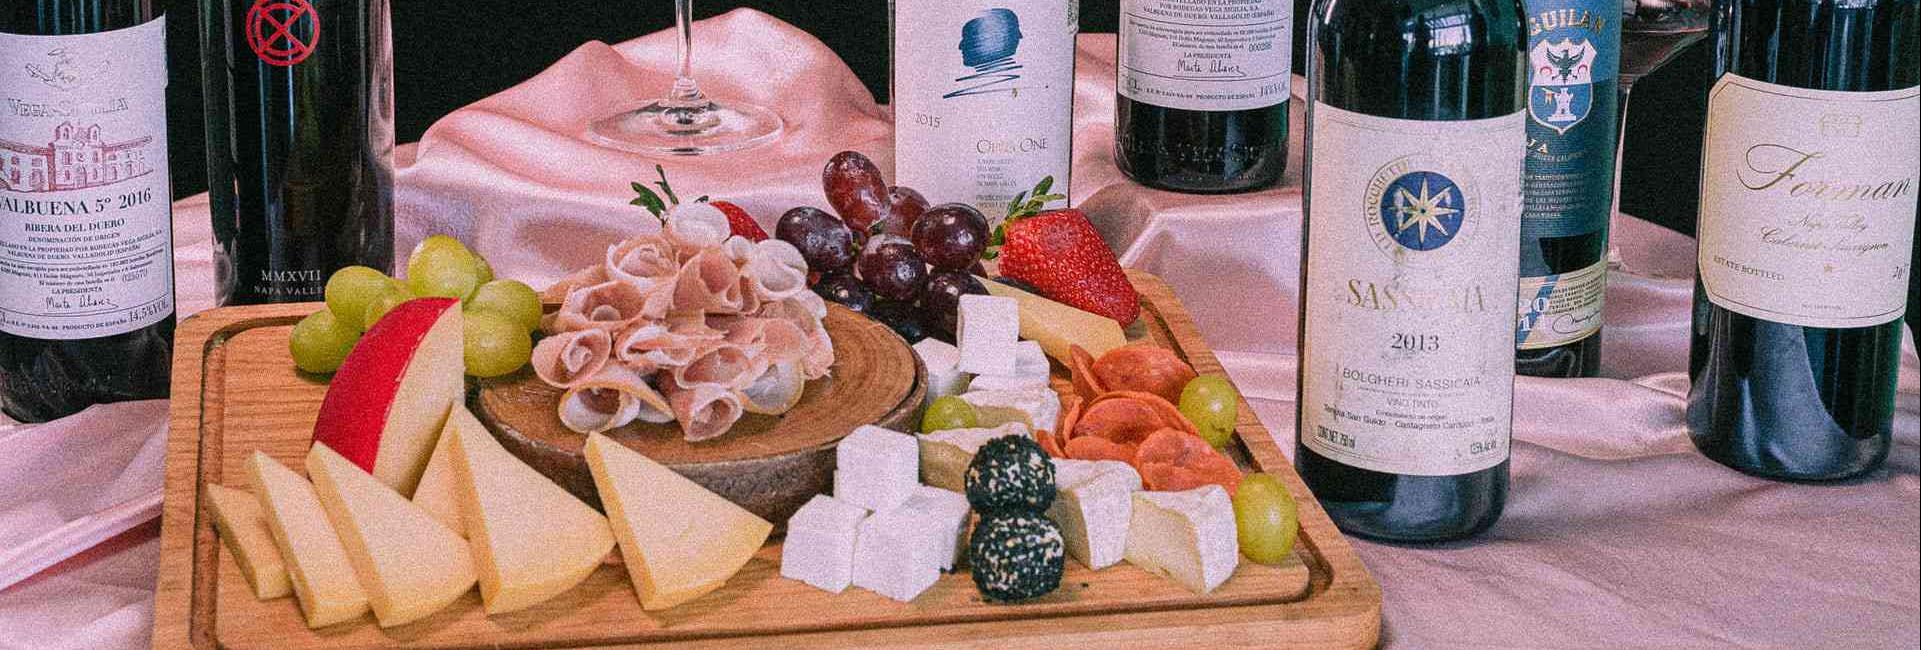 charcuterie board with bottles of wine 